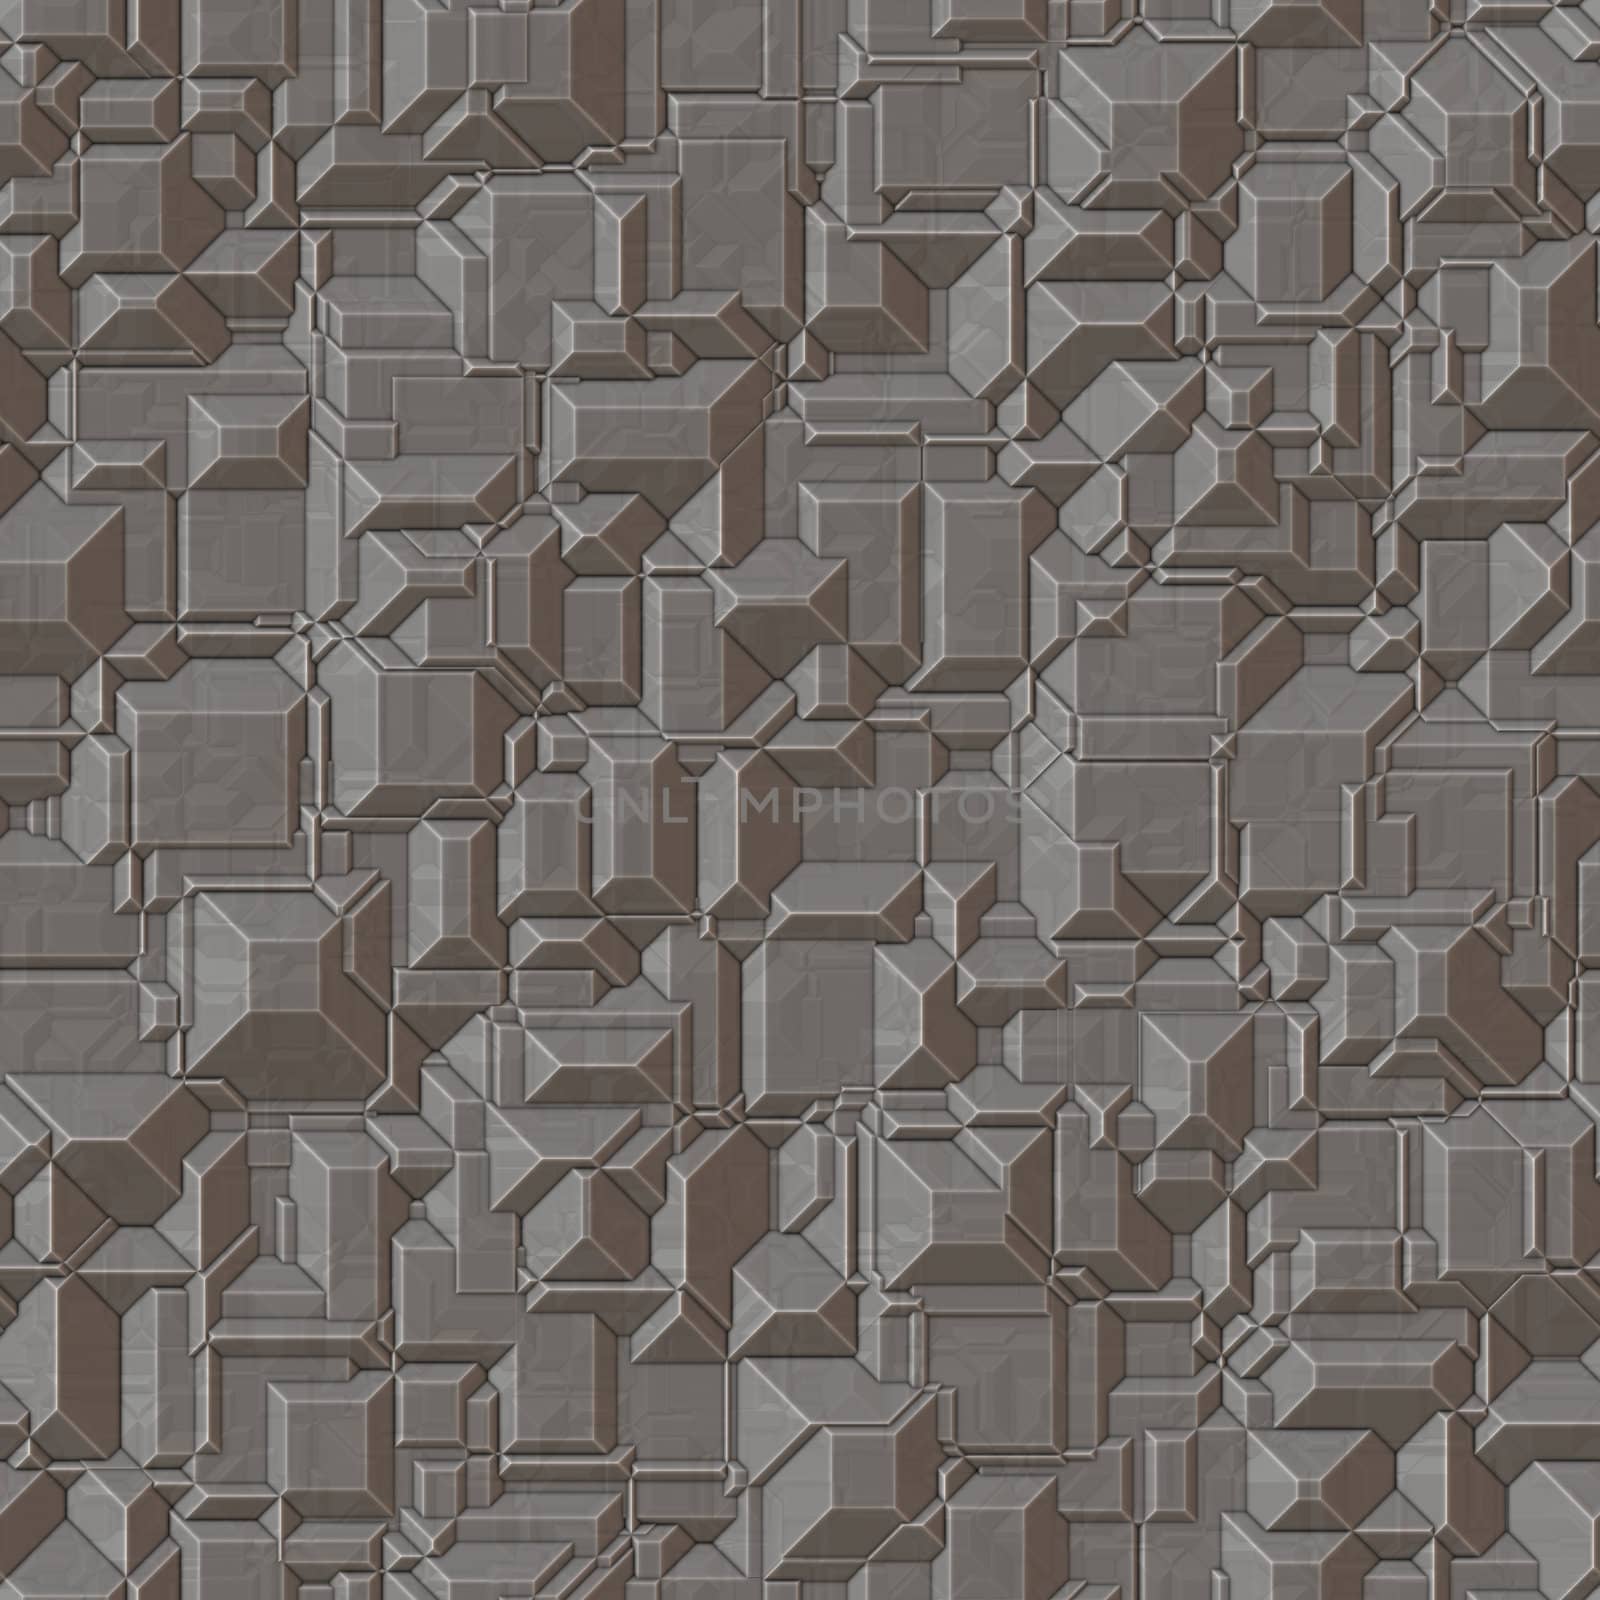 metallic industrial style background, will tile seamlessly as a pattern